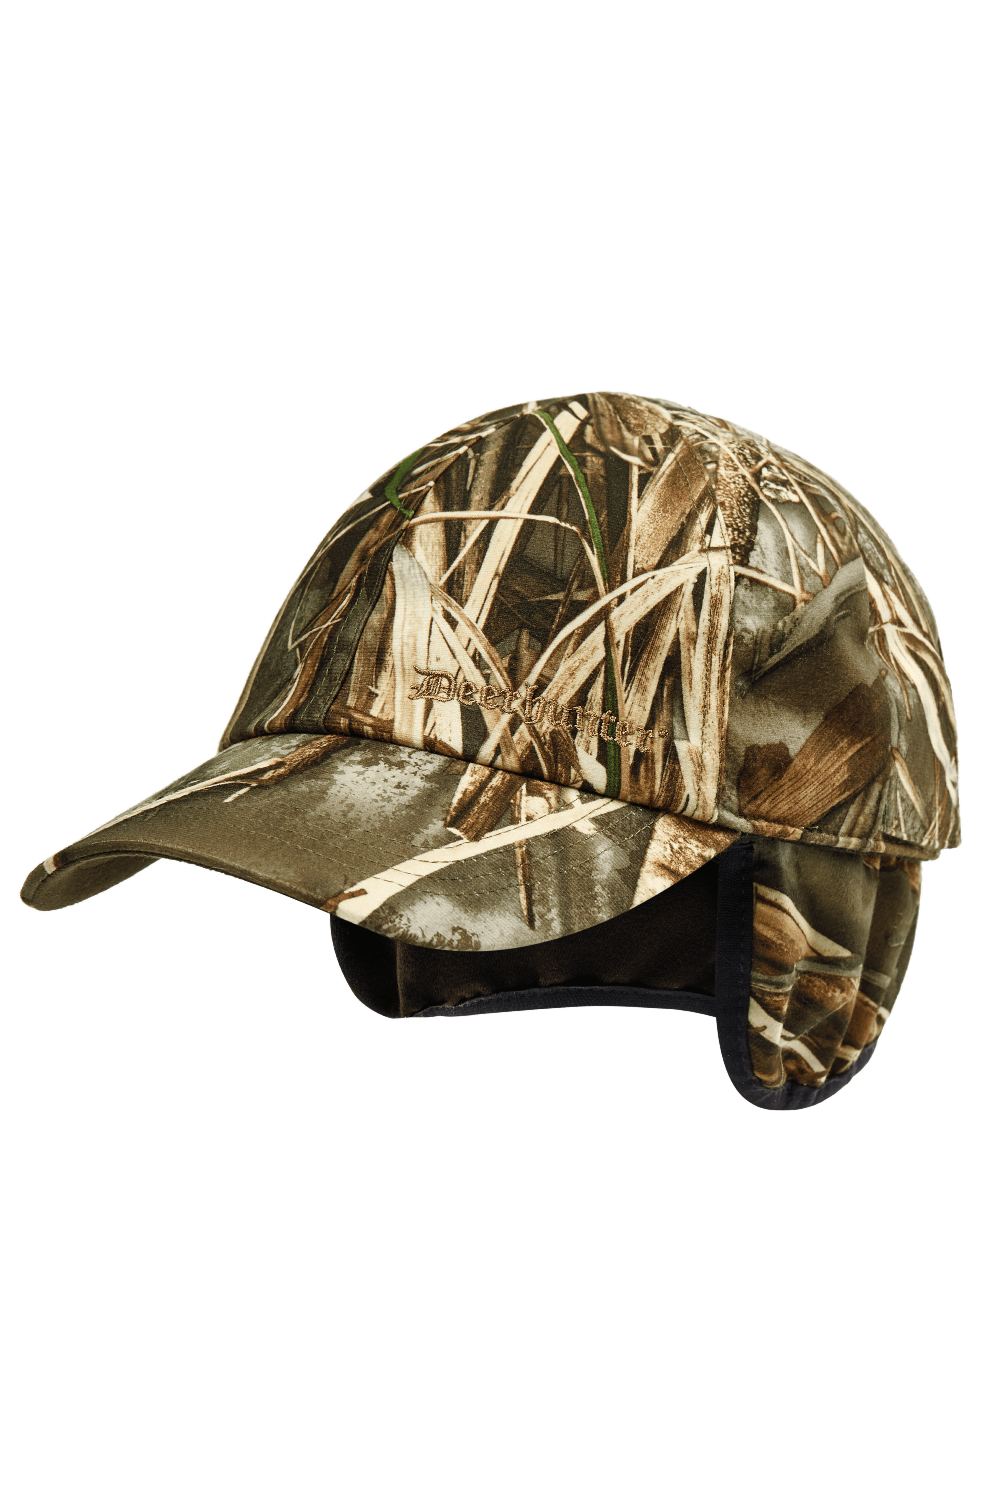 Deerhunter Game Cap with Safety in Realtree MAX-7 